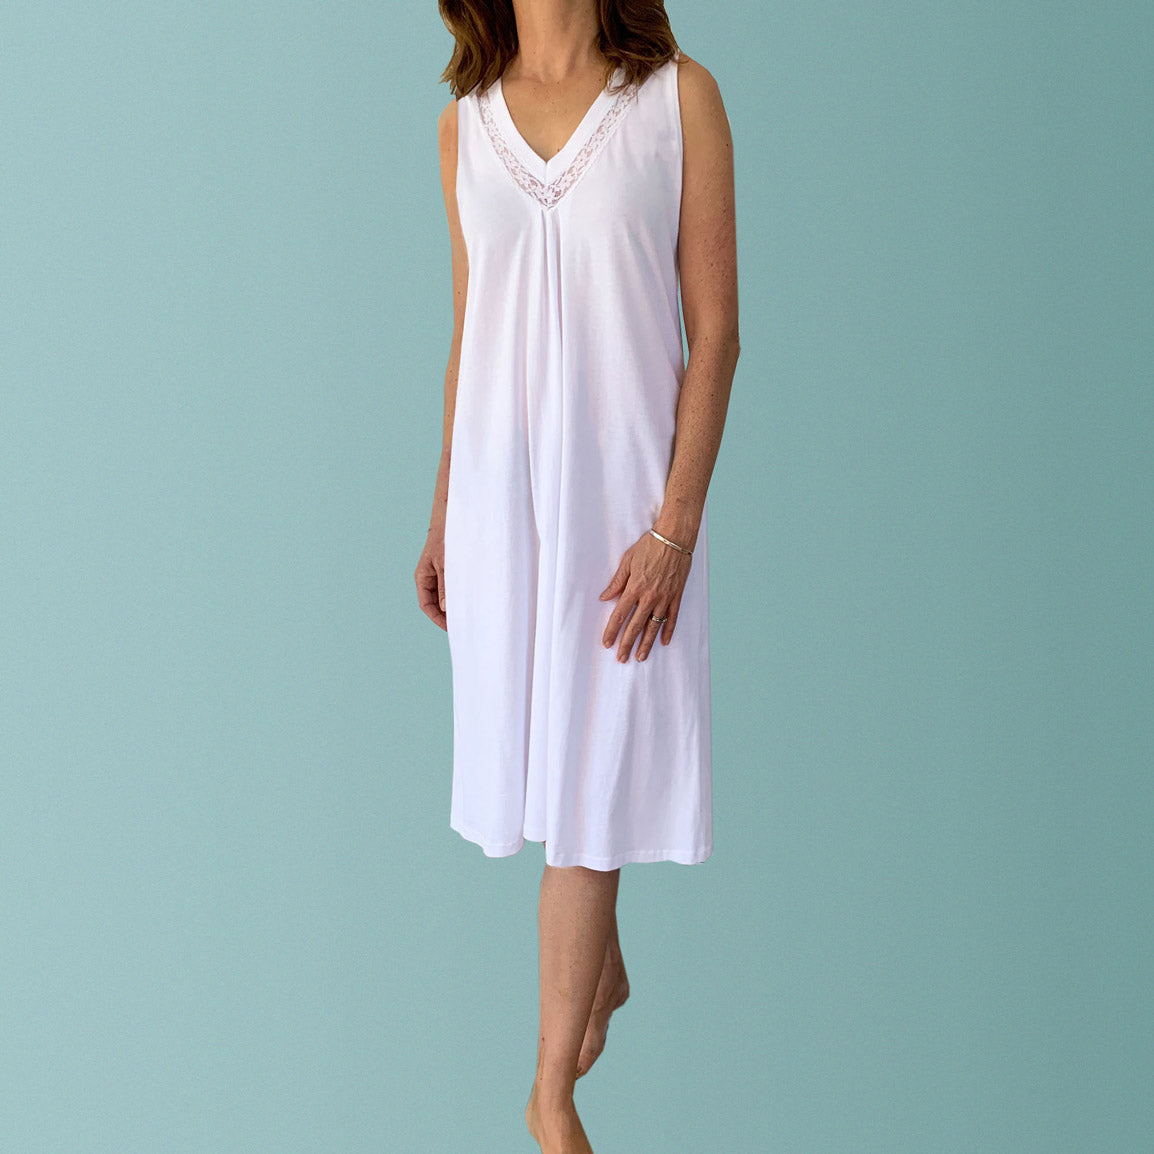 Plus size women's sleepwear. Organic cotton and lace nightgown made in Australia. Black and white nighties. Nighties buy online